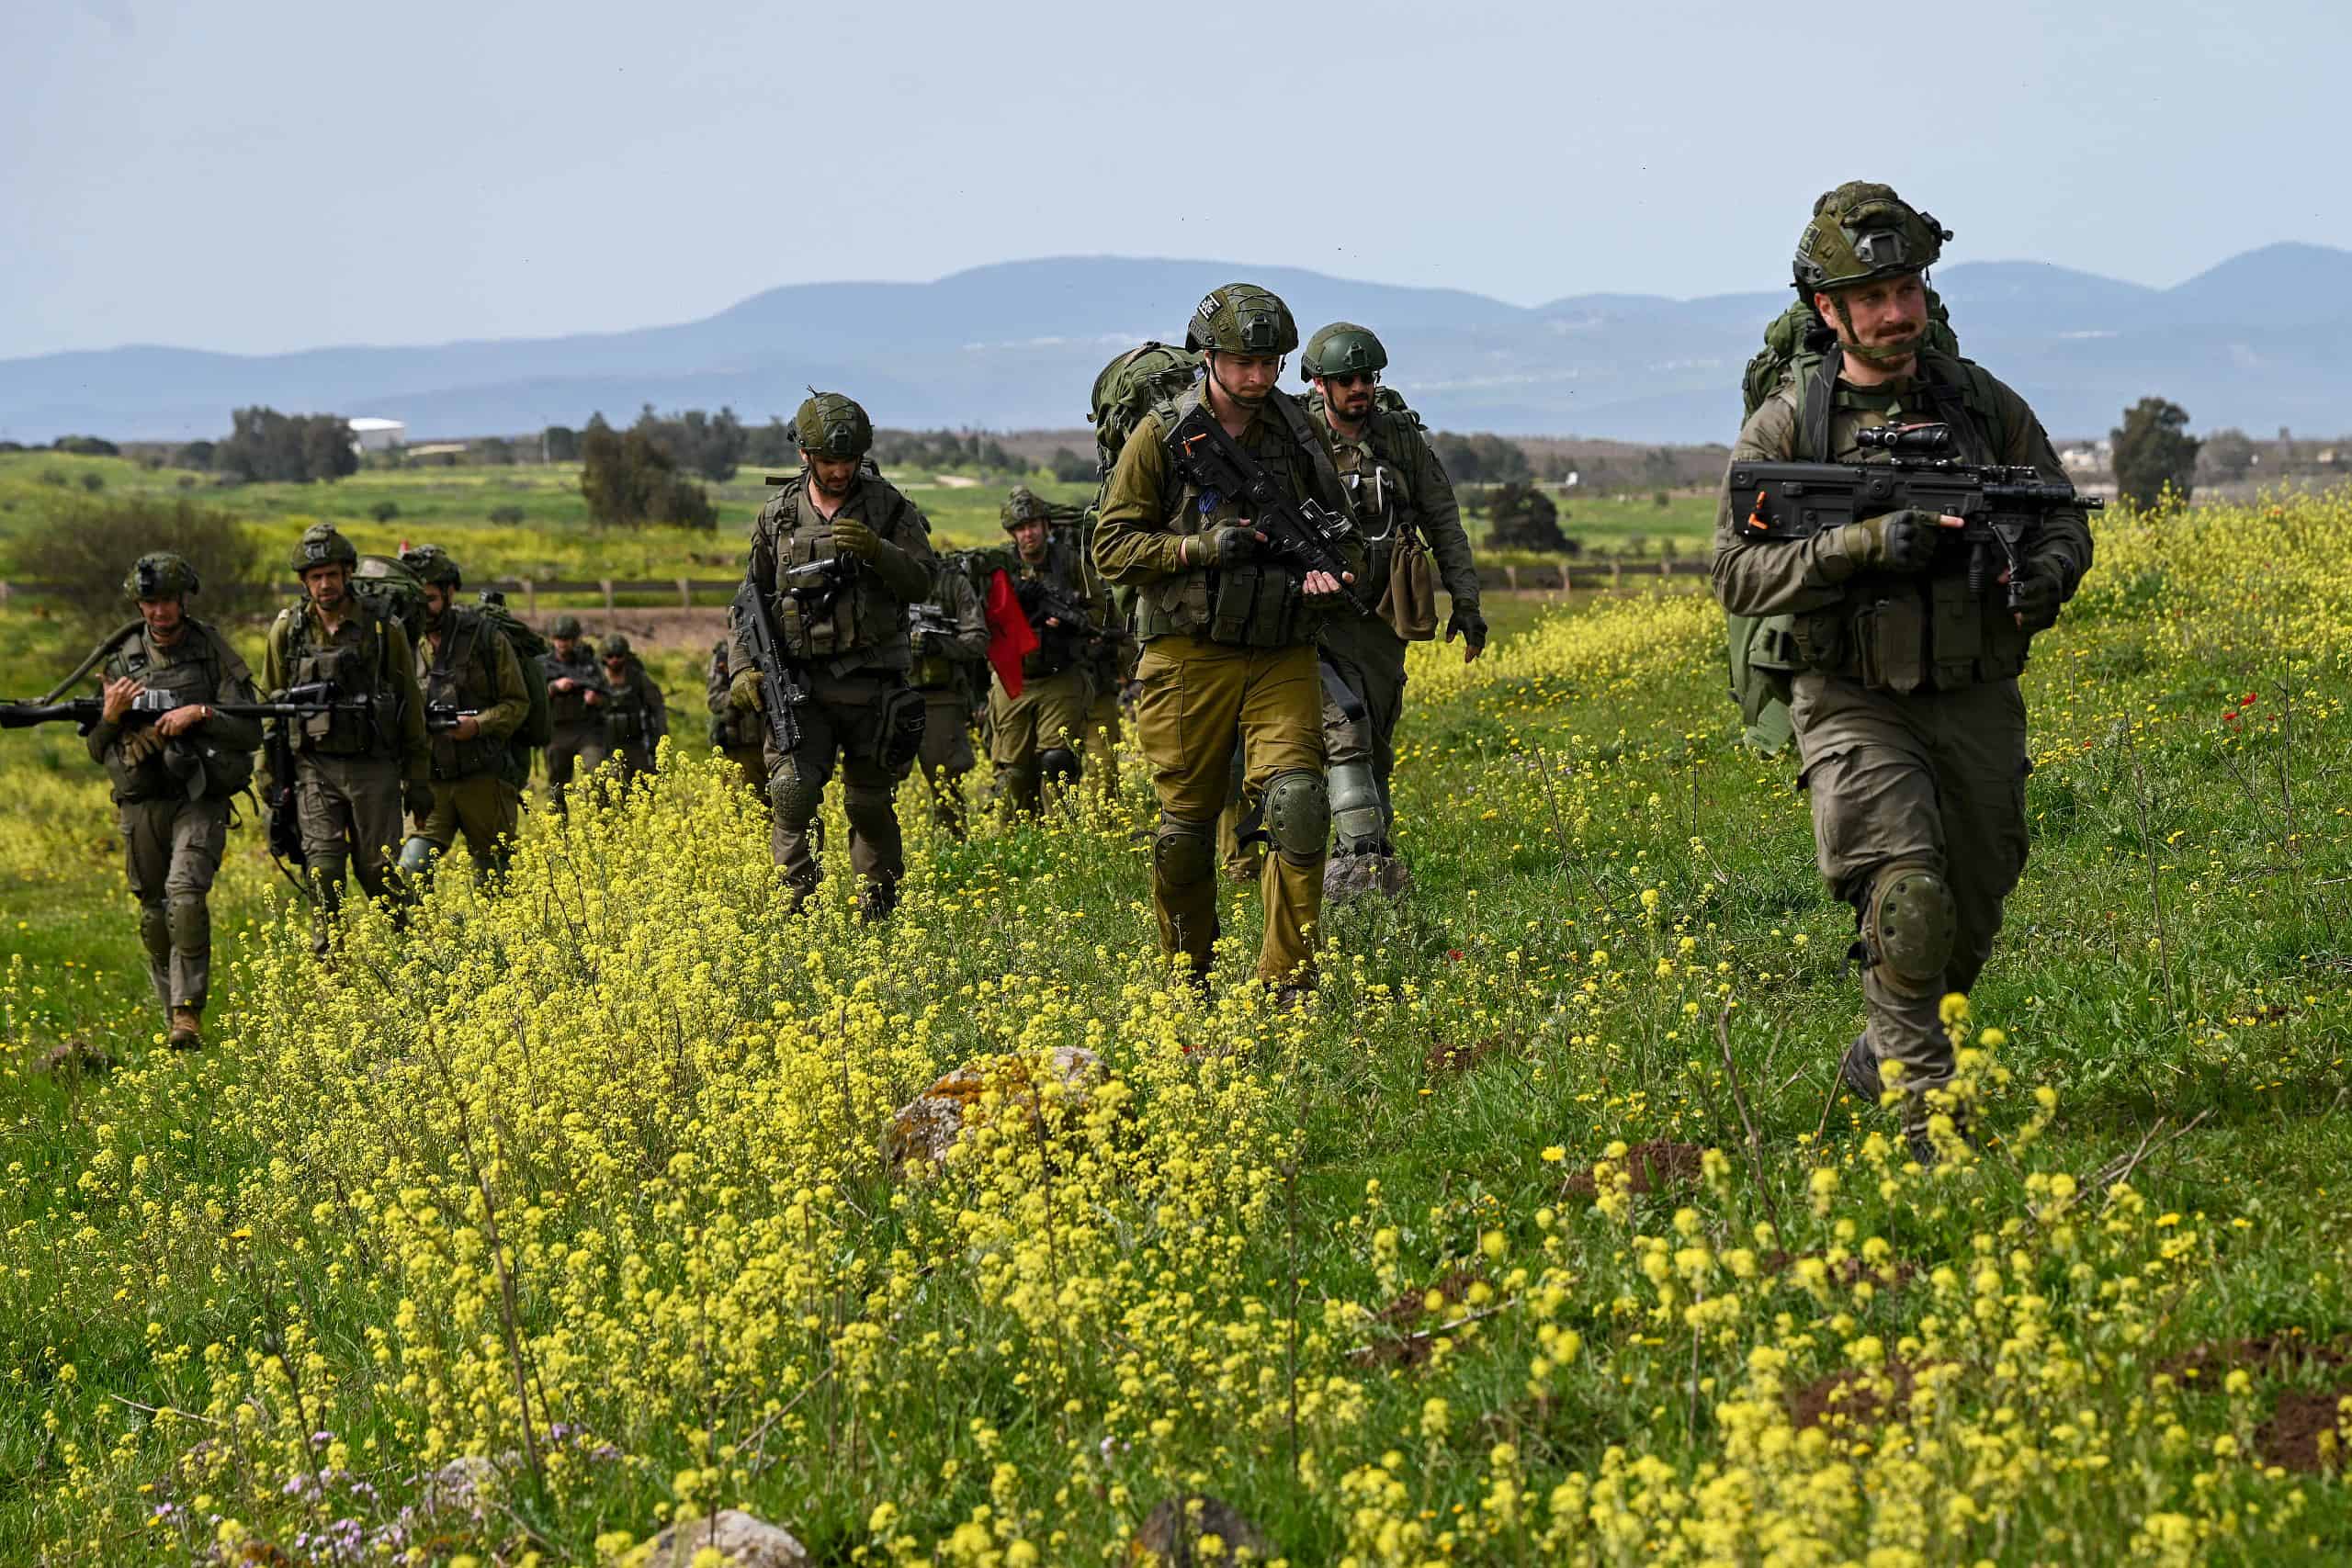 IDF soldier wounded in Hezbollah attack on Upper Galilee